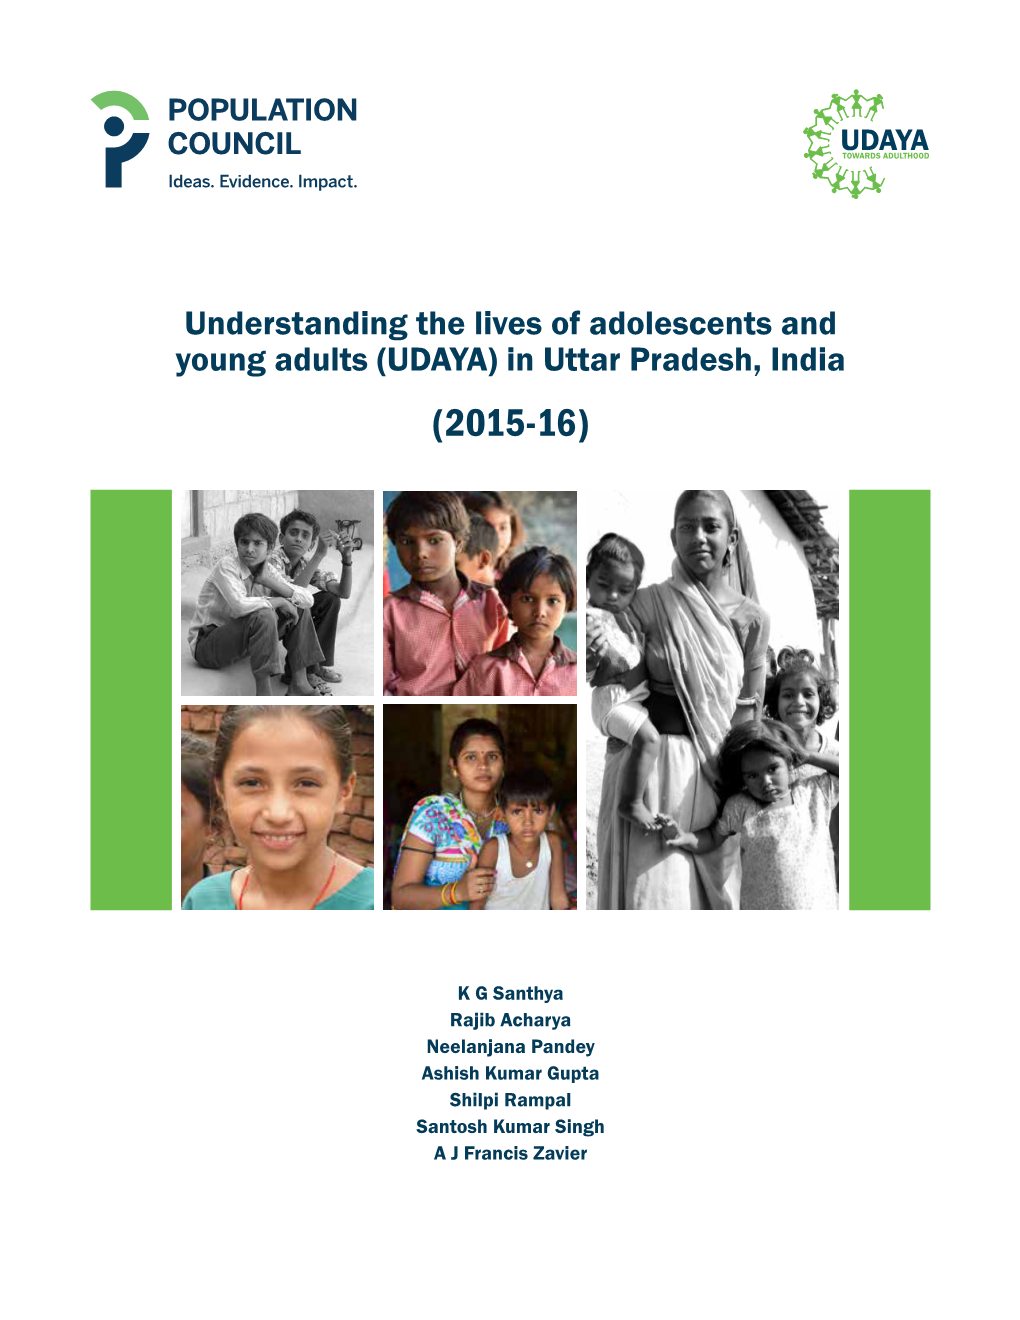 Understanding the Lives of Adolescents and Young Adults (UDAYA) in Uttar Pradesh, India (2015-16)